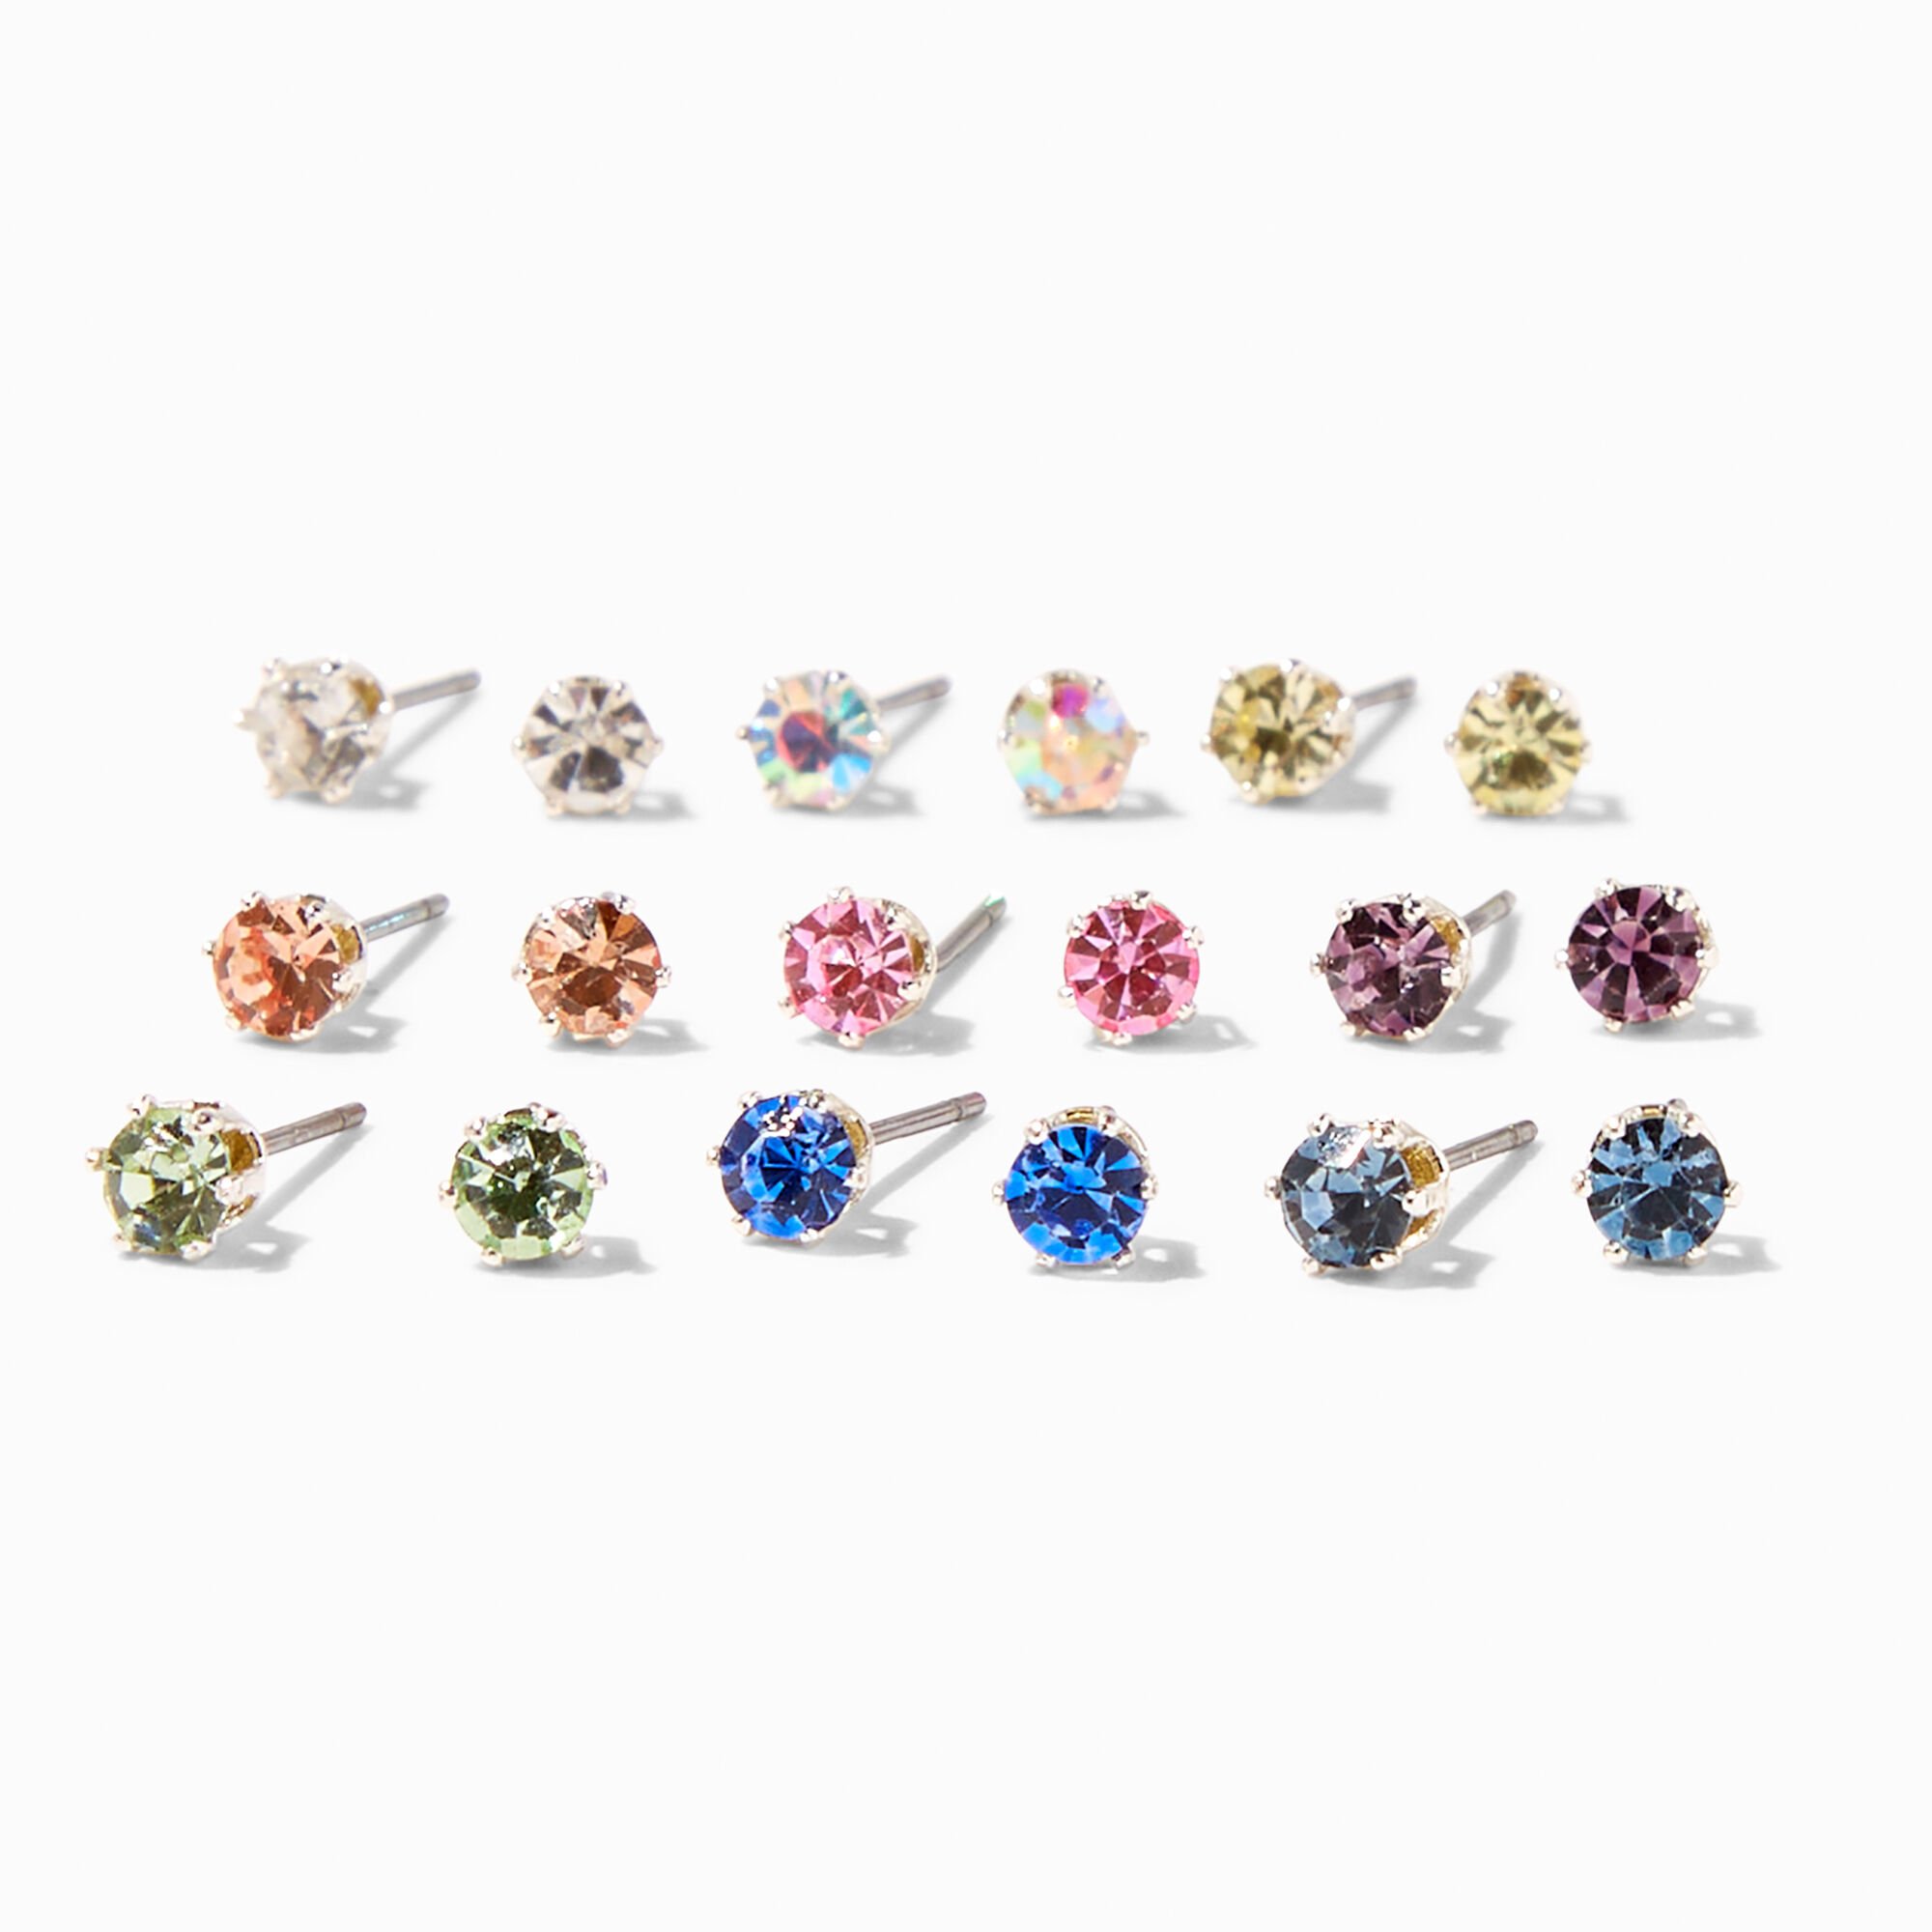 View Claires Pastel Crystal Stud Earrings 9 Pack Silver information